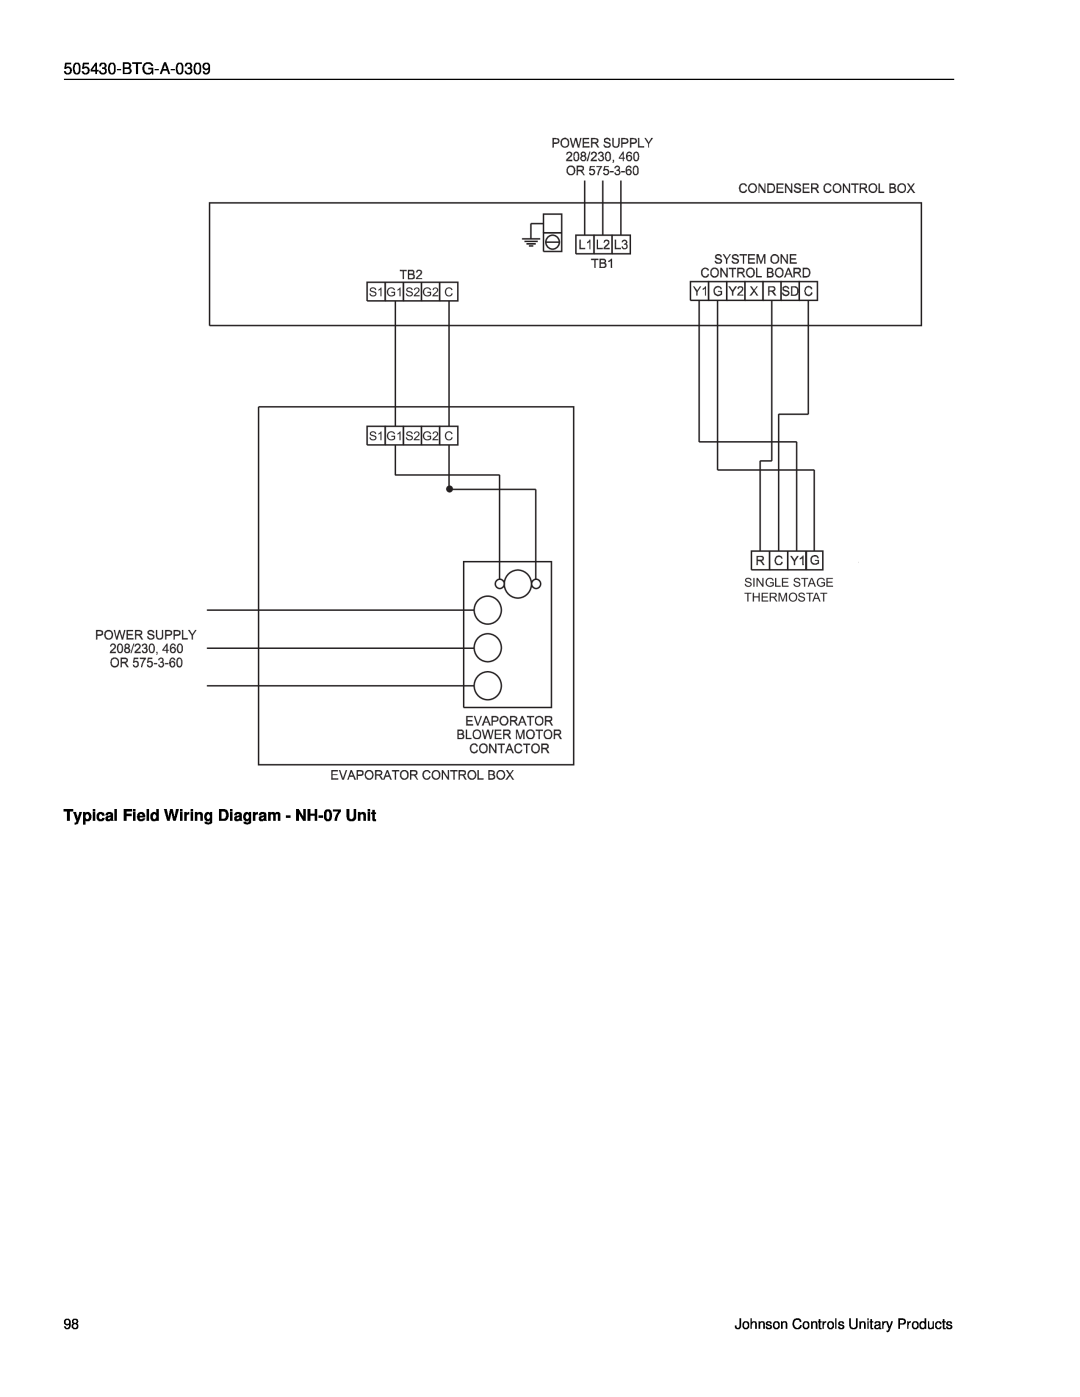 Johnson Controls R-410A Typical Field Wiring Diagram - NH-07Unit, S1 G1 S2 G2 C S1 G1 S2 G2 C SINGLE STAGE, Thermostat 